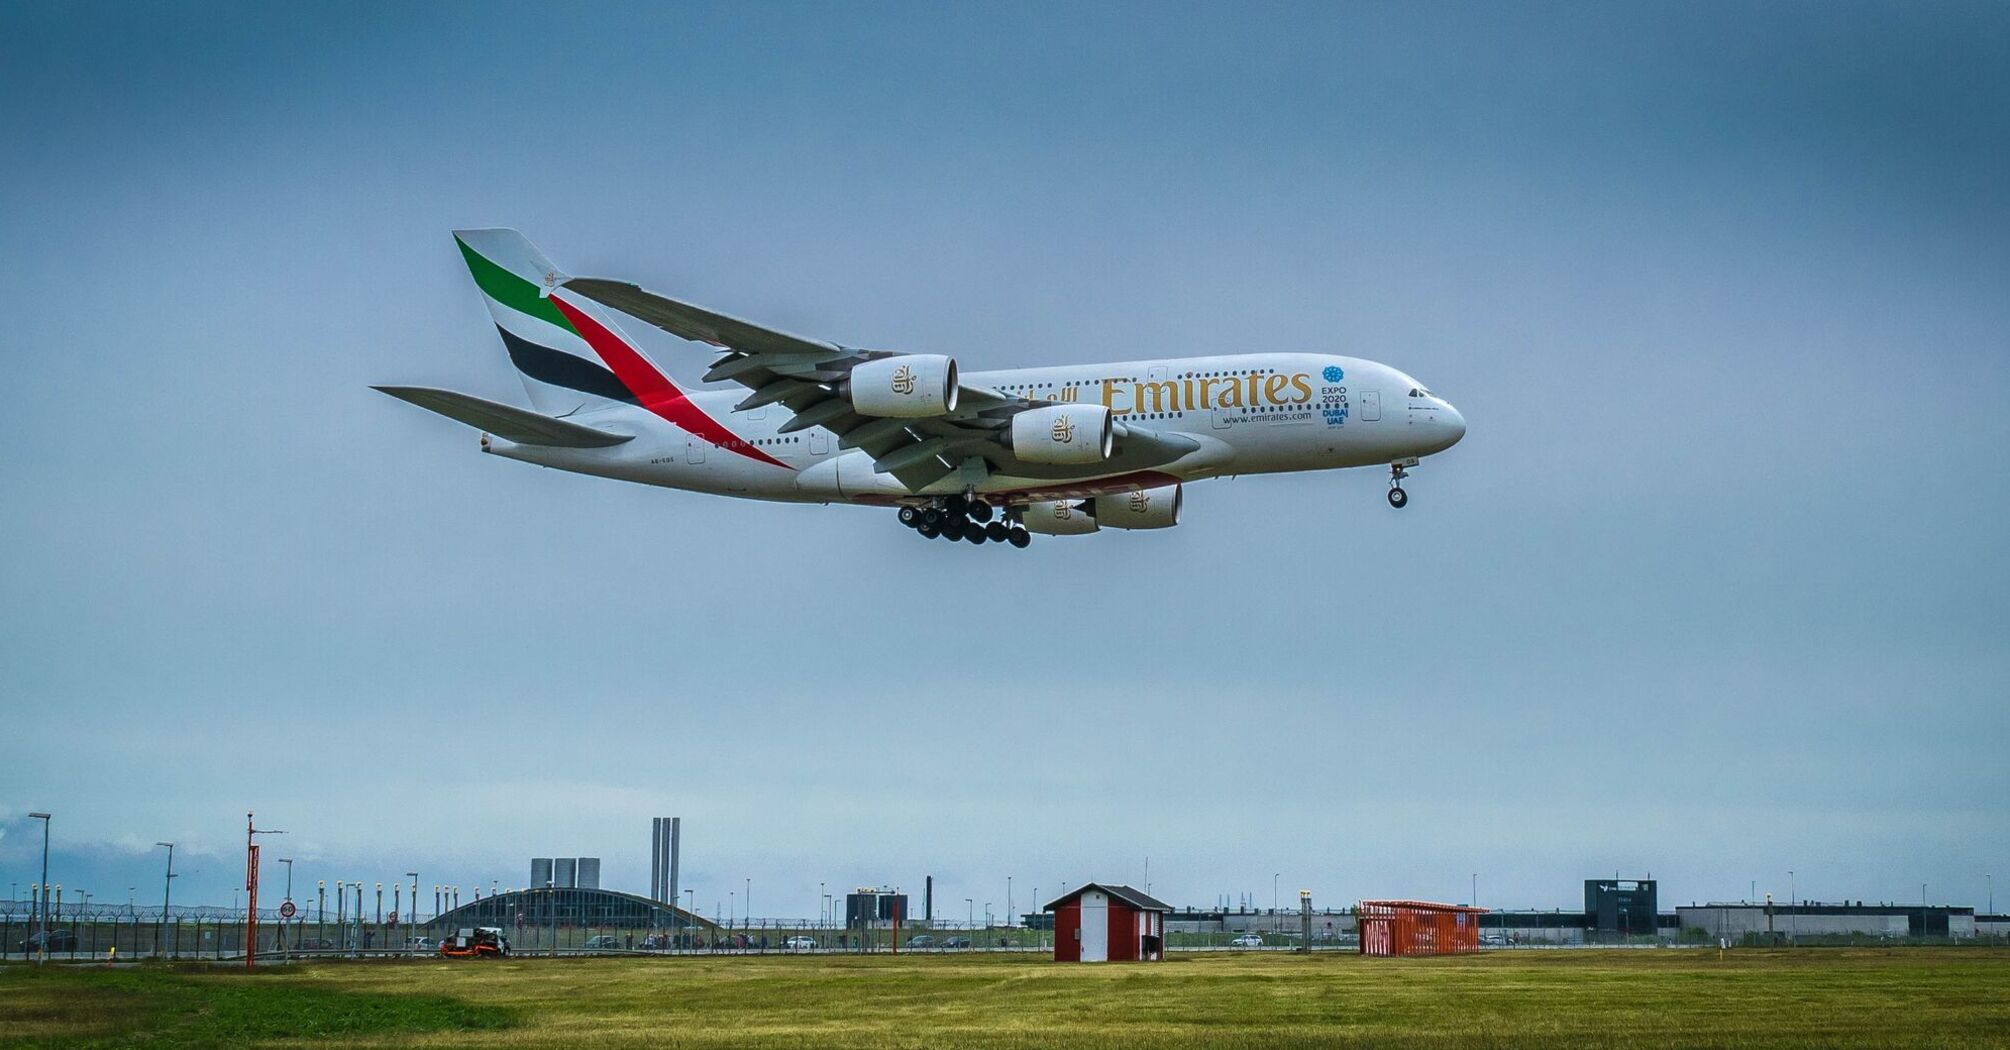 Emirates Airbus A380 approaching landing against a cloudy sky